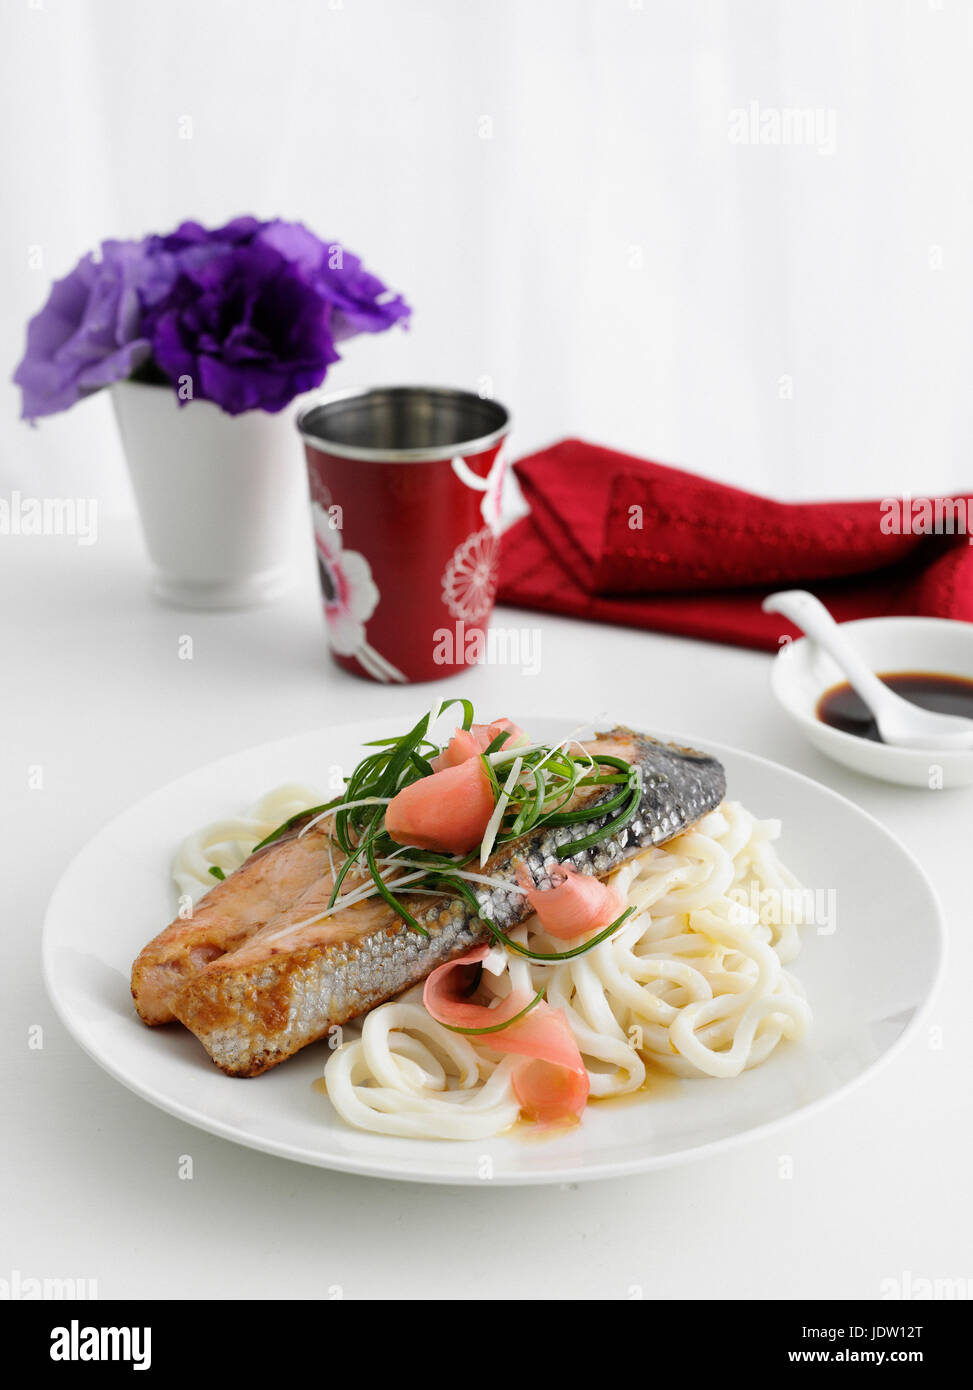 Plate of fish and pasta on table Stock Photo